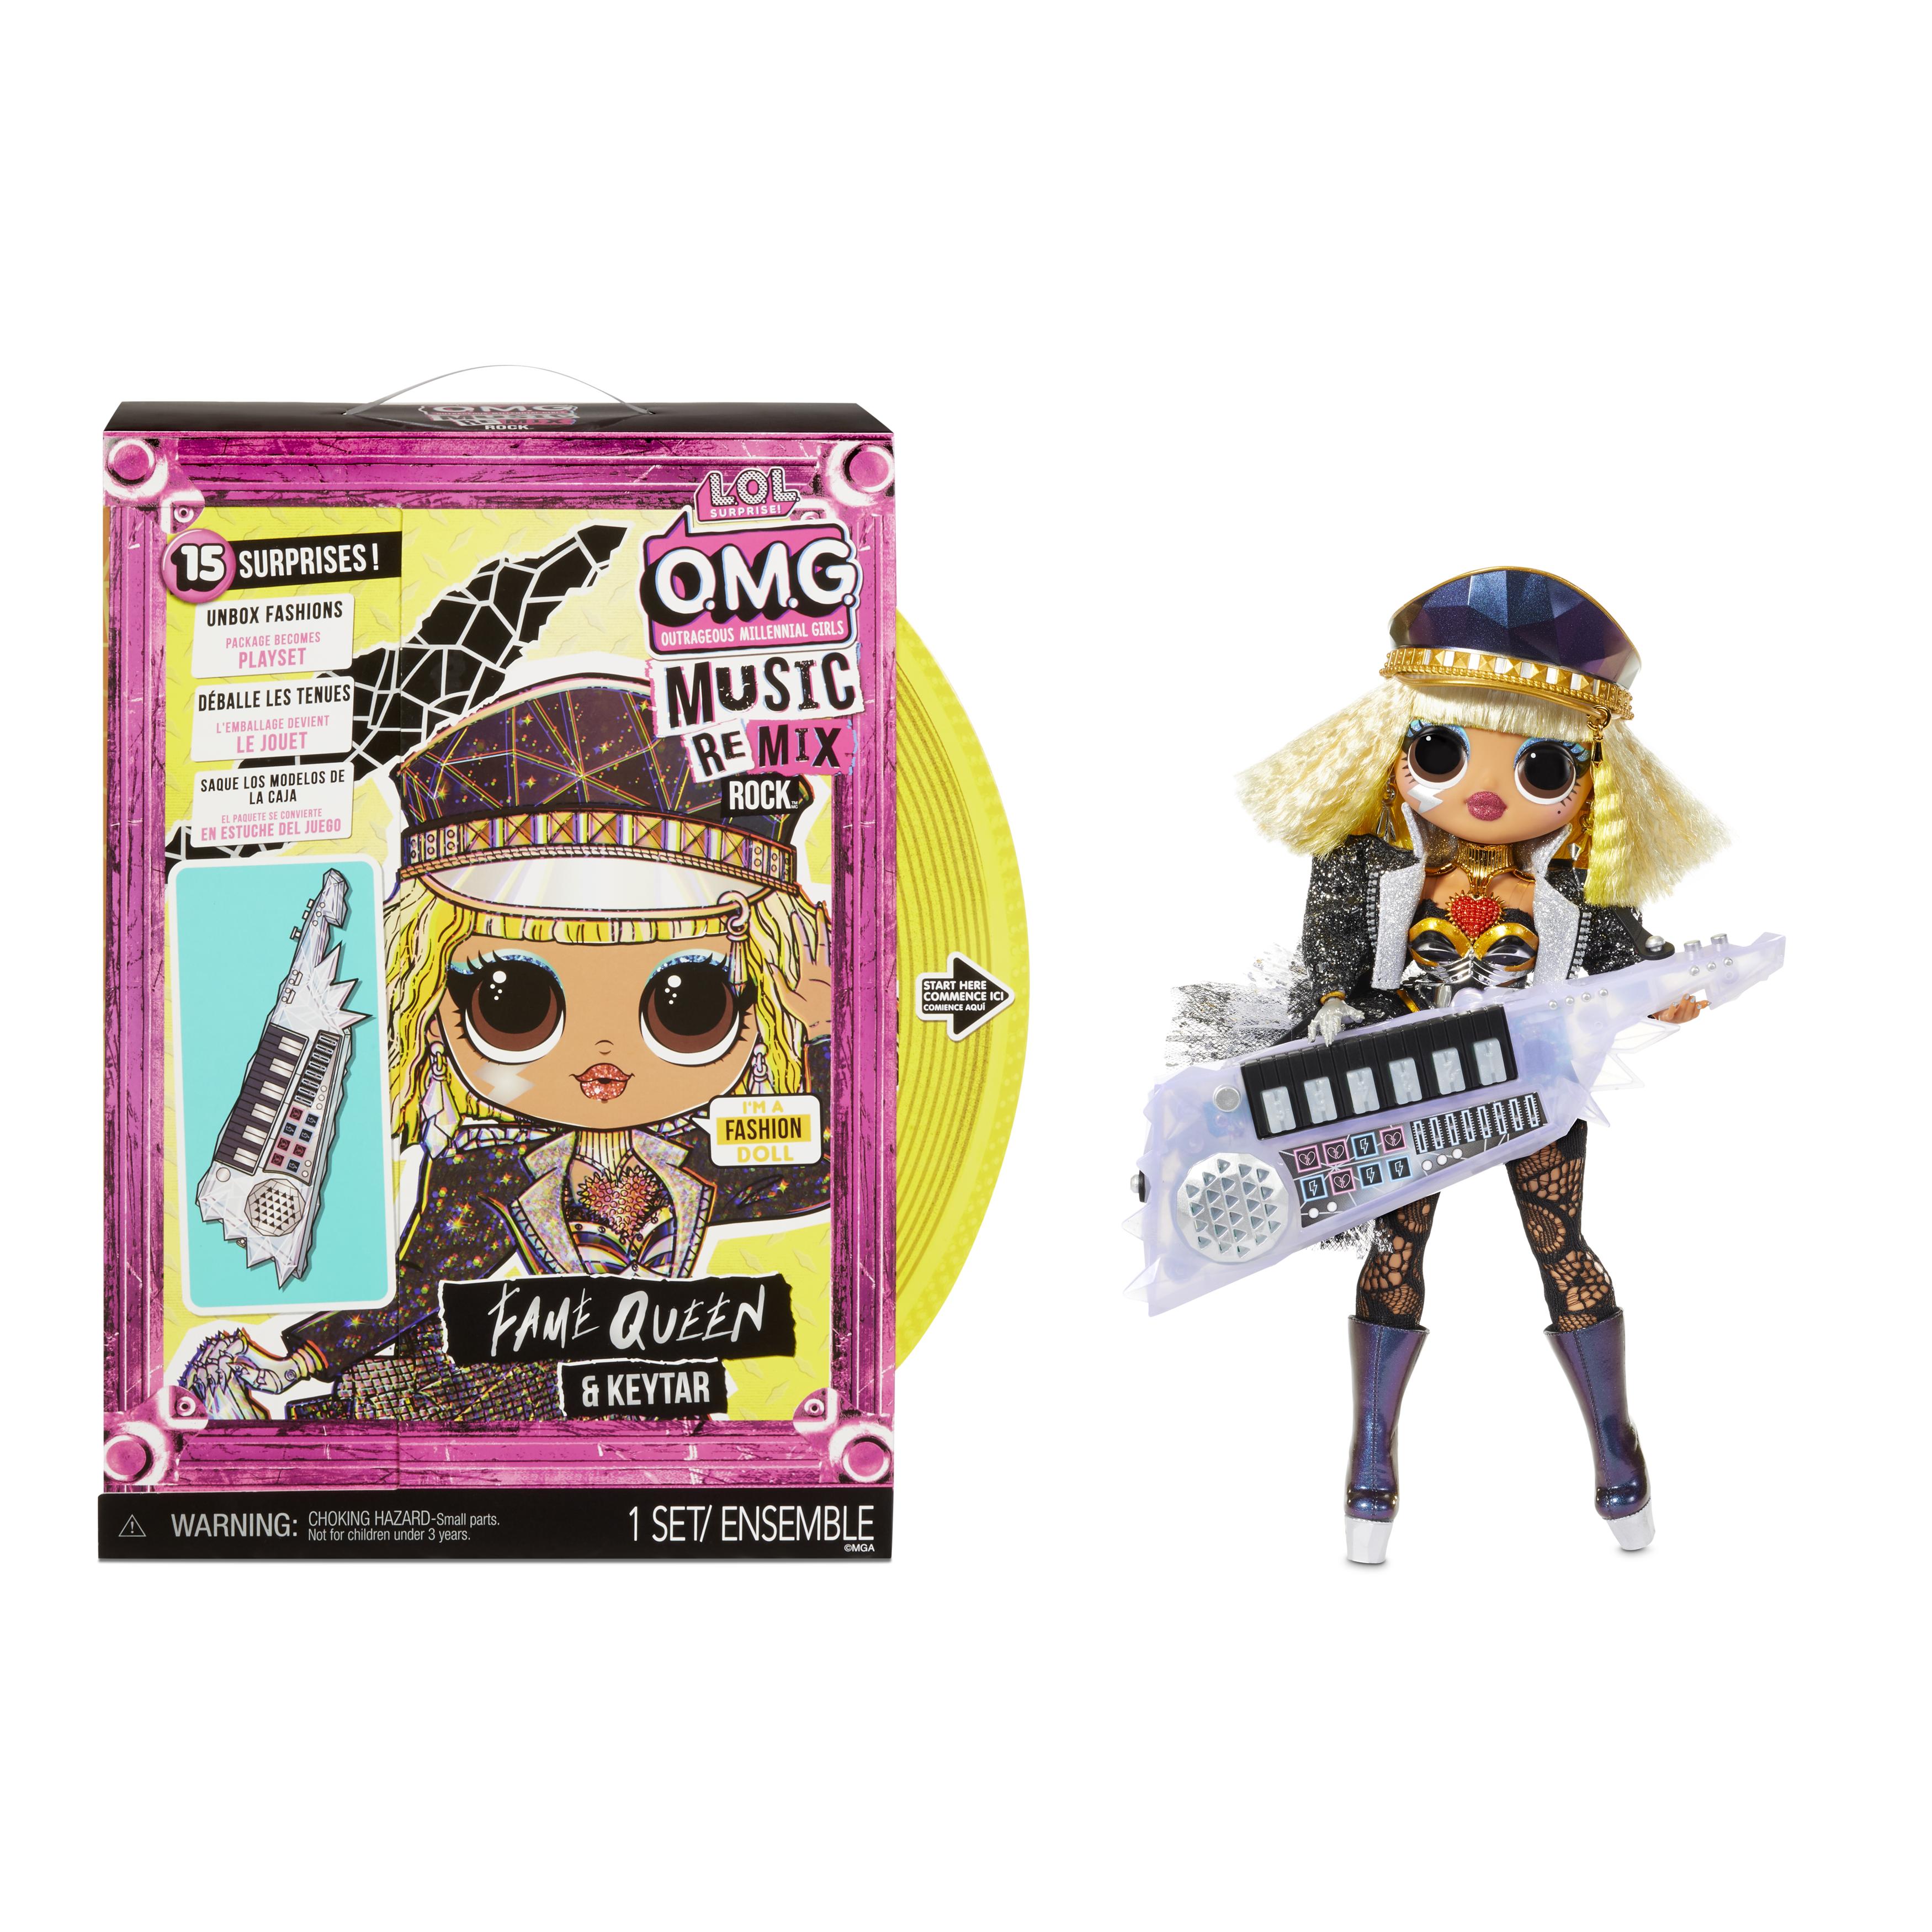 L.O.L. Surprise - OMG Remix Rock- Fame Queen and Keytar (577607)